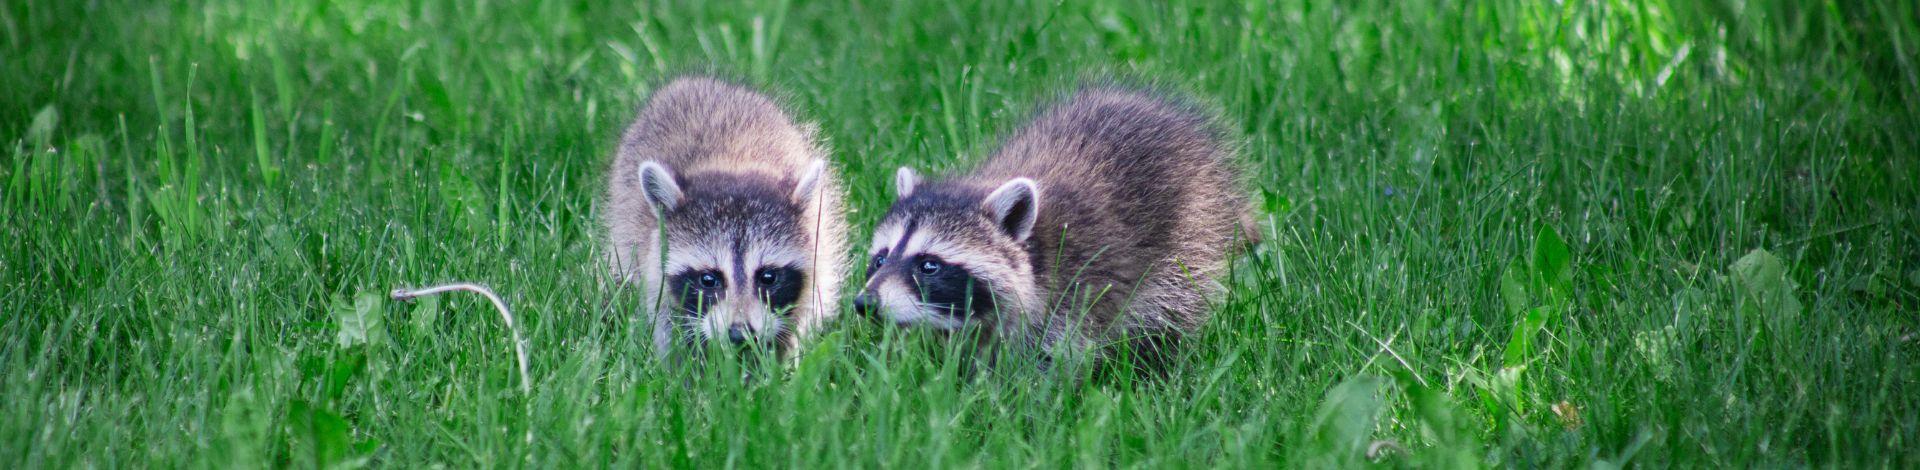 Two racoons in grass